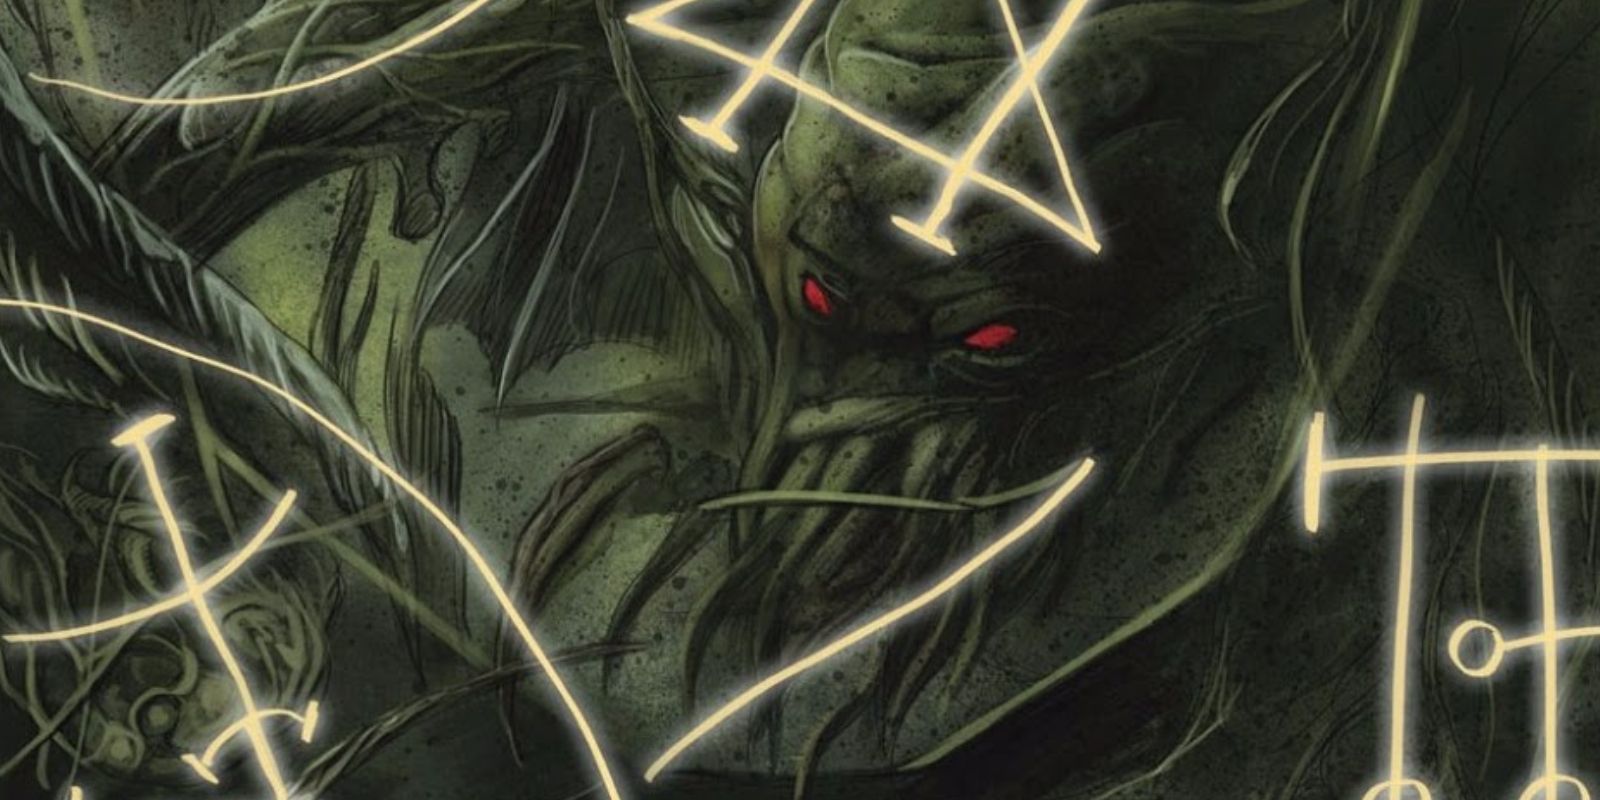 How IDW Updated a Classic HP Lovecraft Tale With Sickening Results